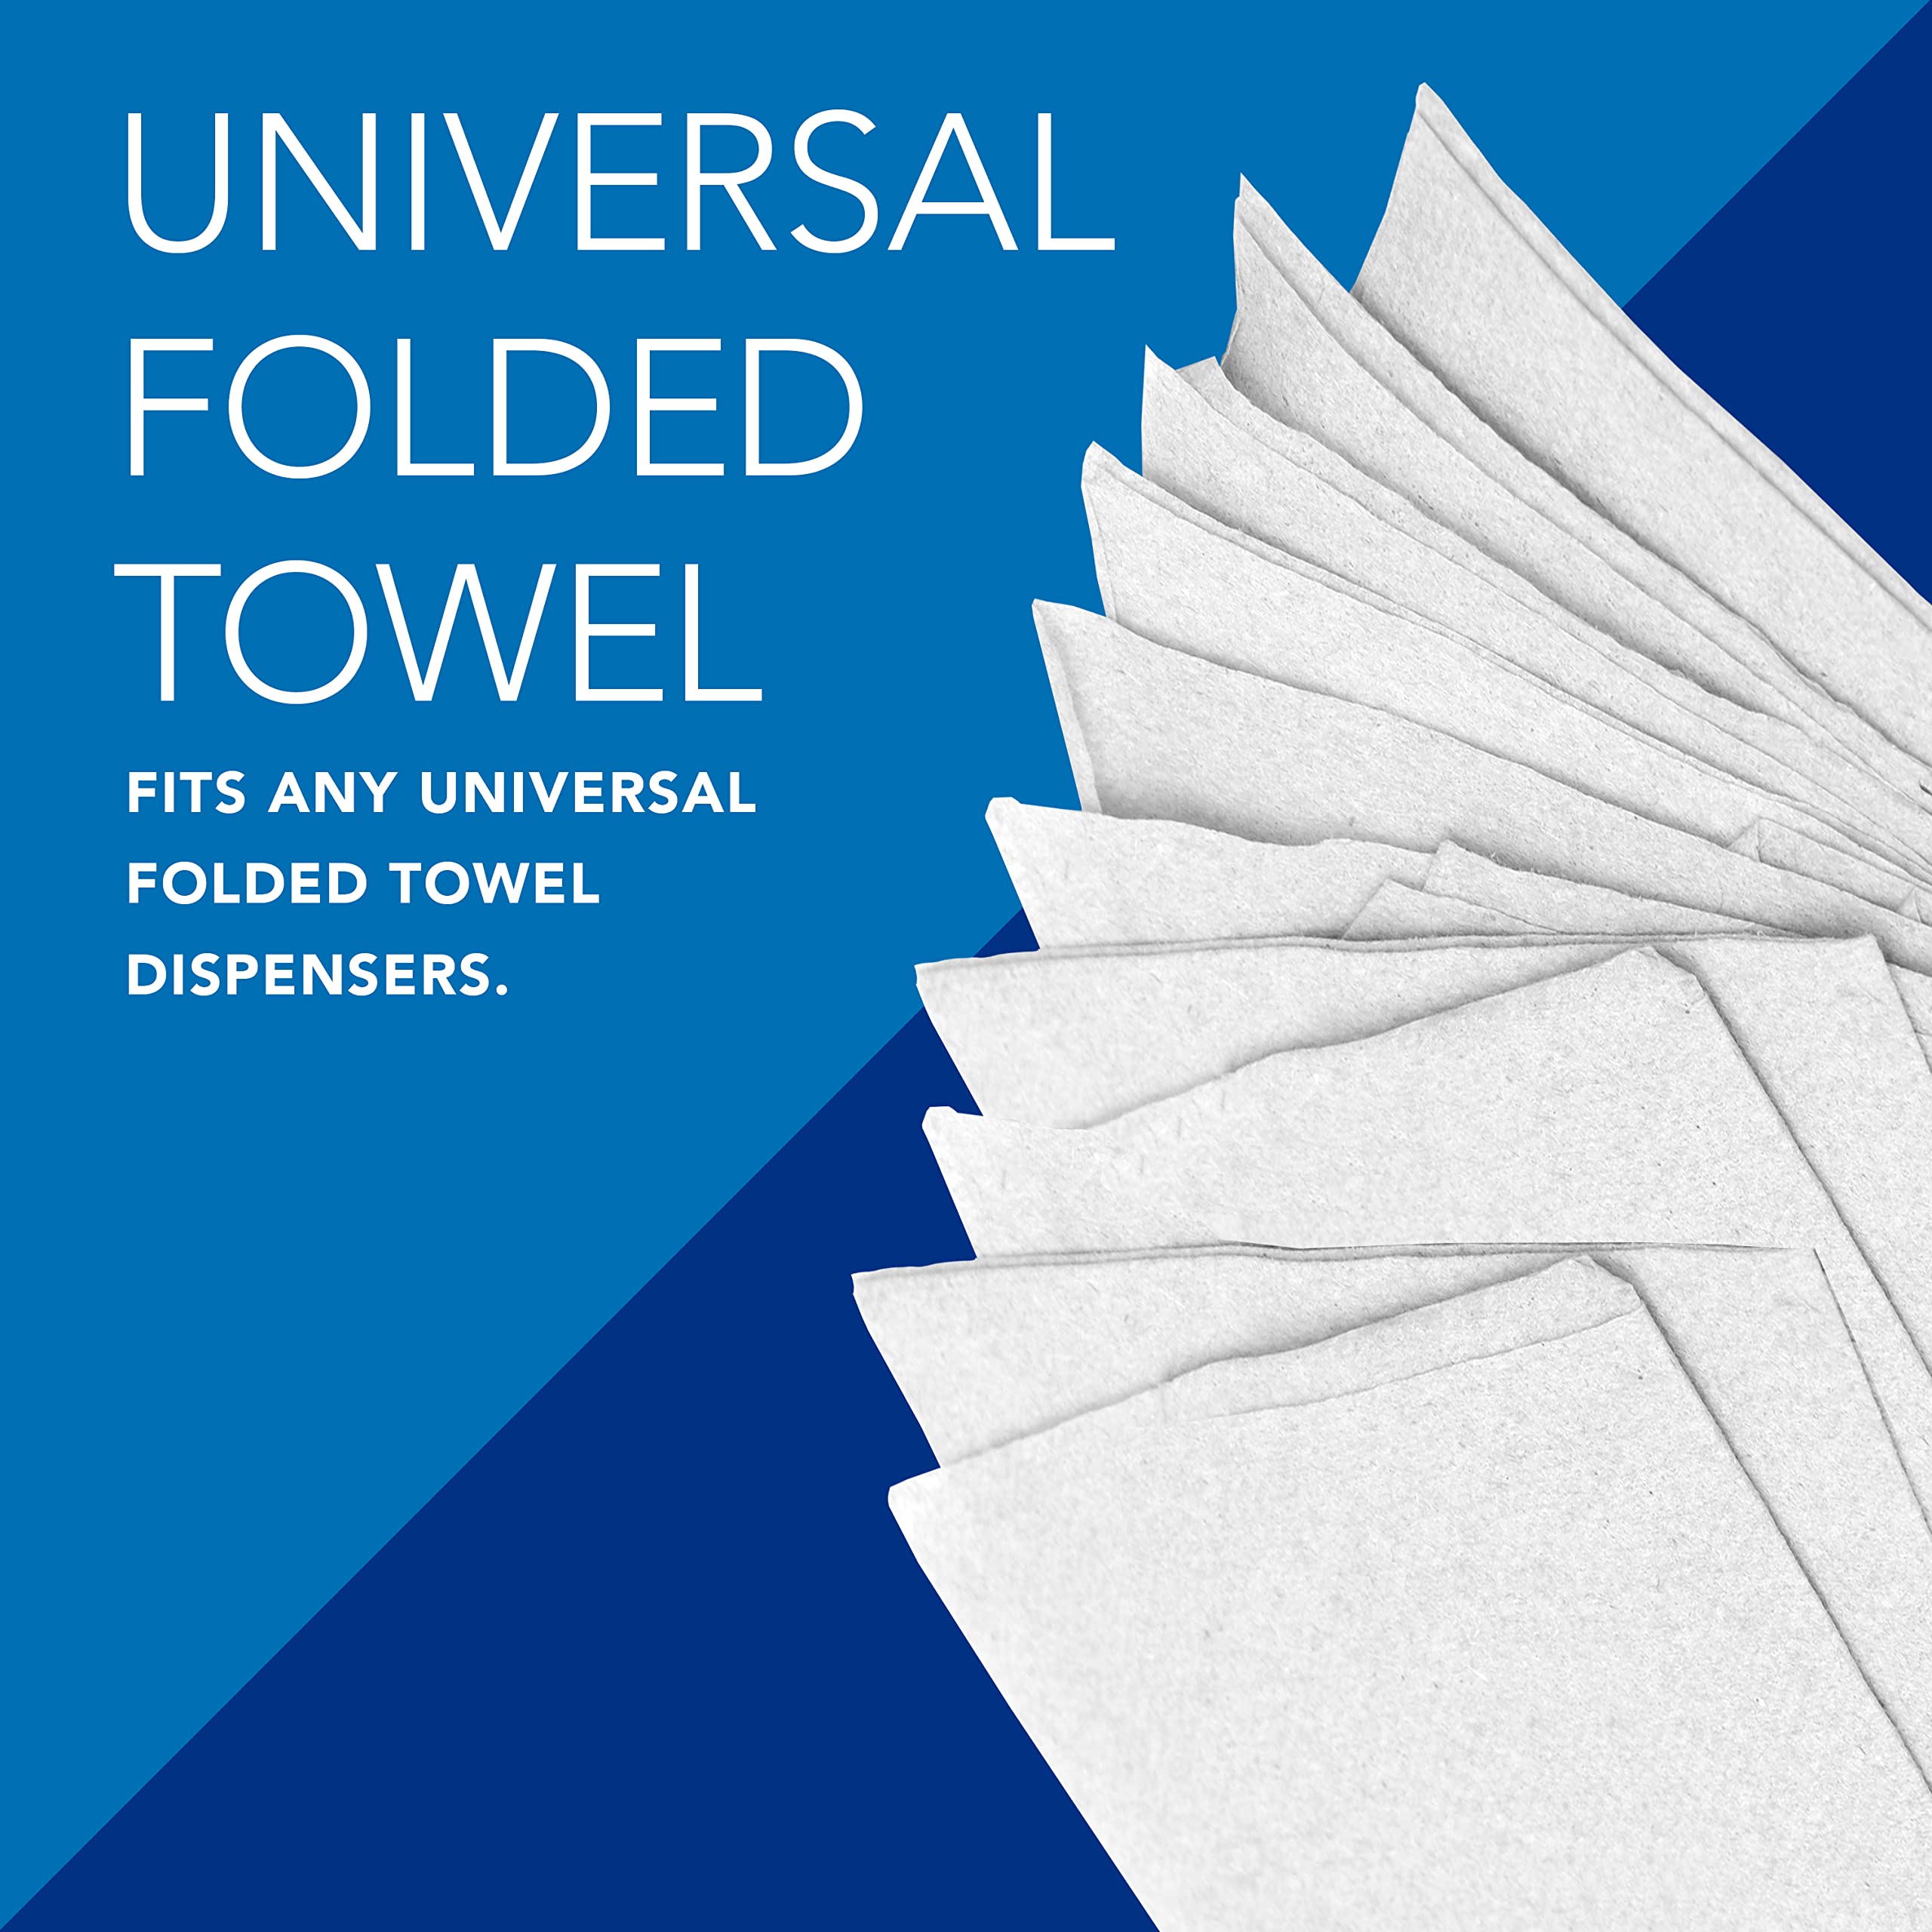 Scott® Multifold Paper Towels (01840), with Absorbency Pockets™, 9.2